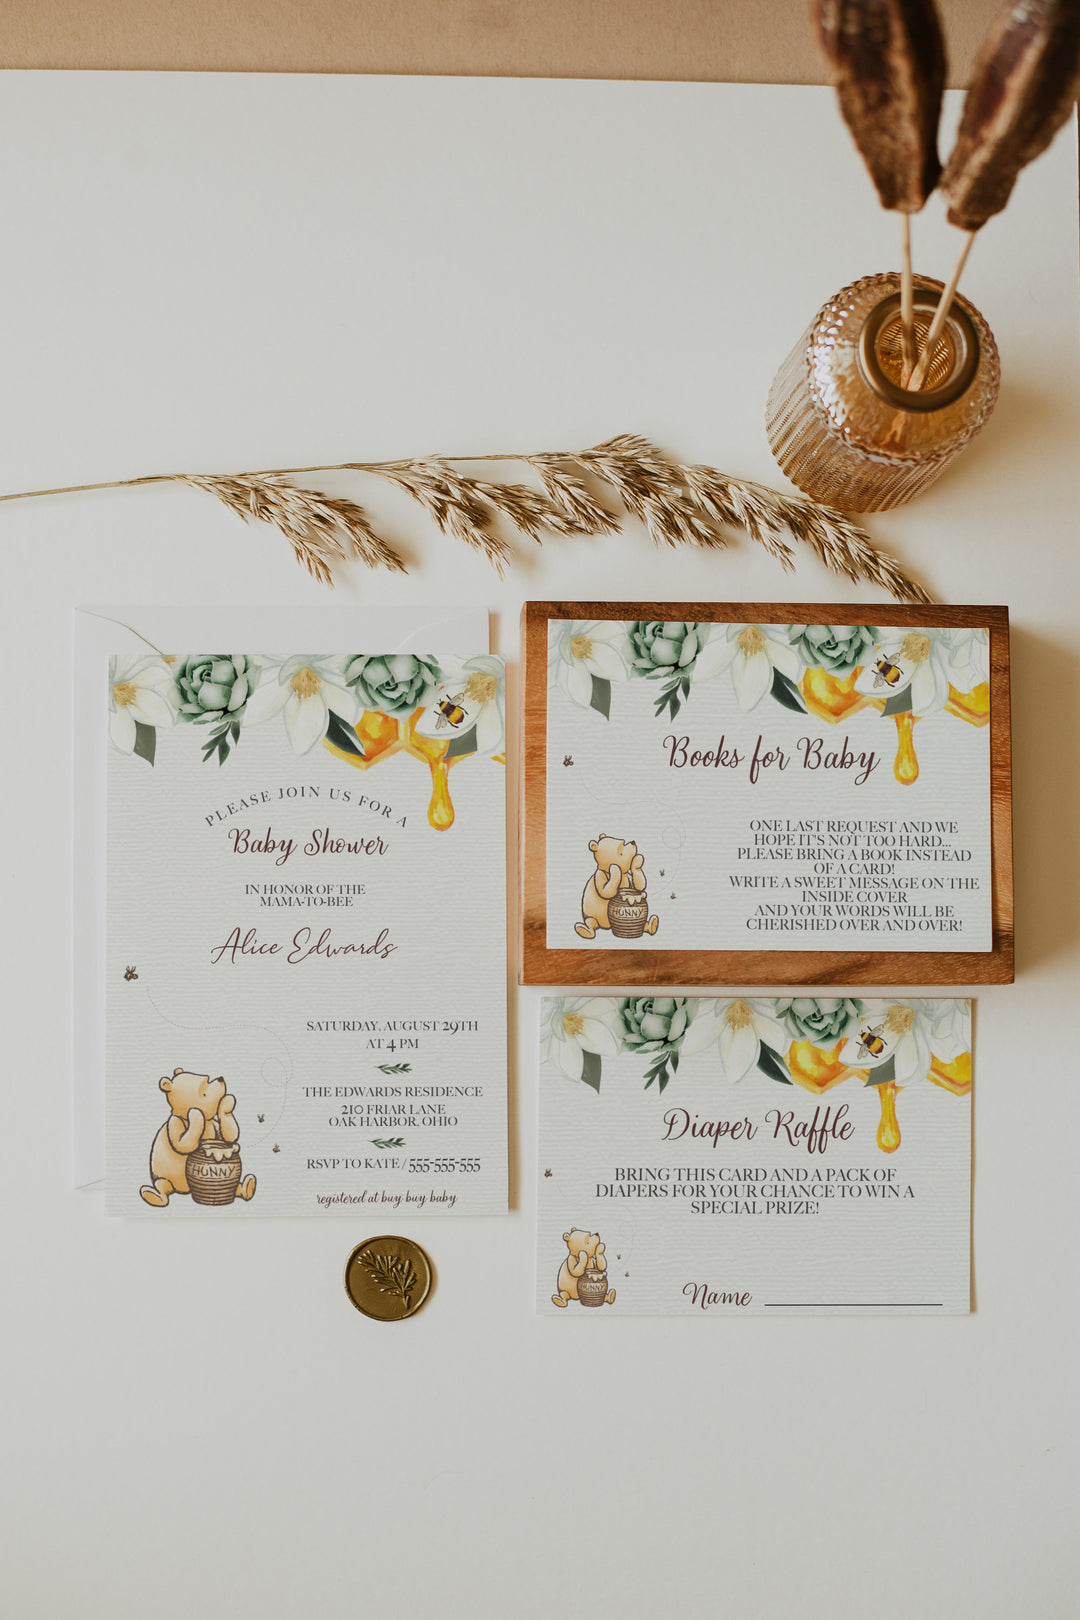 Floral Winnie the Pooh Baby Shower Invitation Suite - Floral Vintage Winnie the Pooh Baby Shower Invitation - Classic Winnie the Pooh Baby